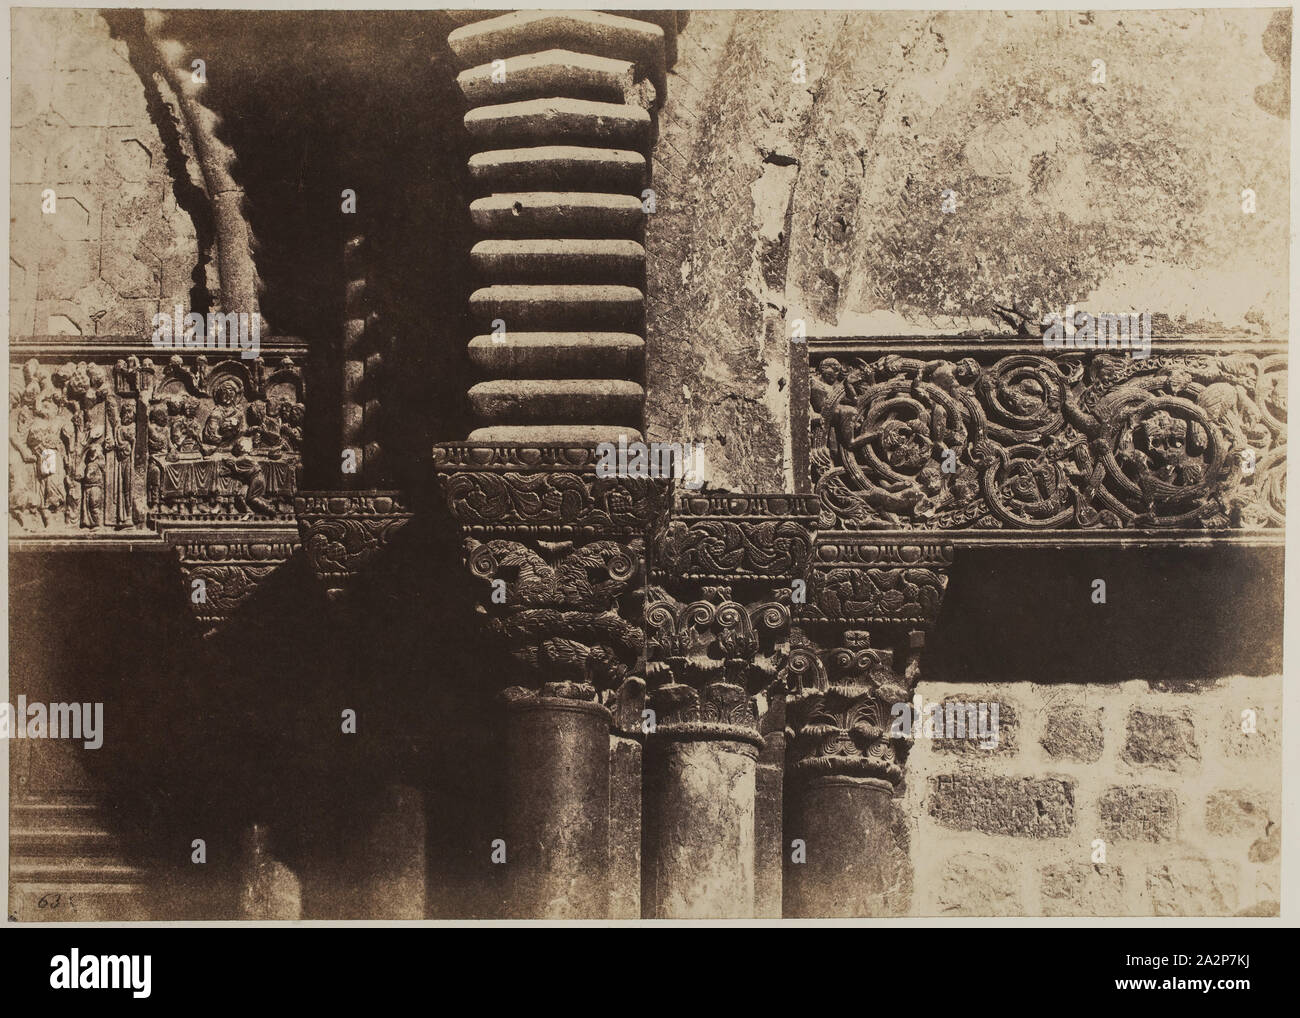 Auguste Salzmann, French, 1824-1872, Jerusalem, Saint Sepulcre, Details of Capitals, 1854, salt print from waxed paper negative, Image: 9 3/8 × 13 inches (23.8 × 33 cm Stock Photo